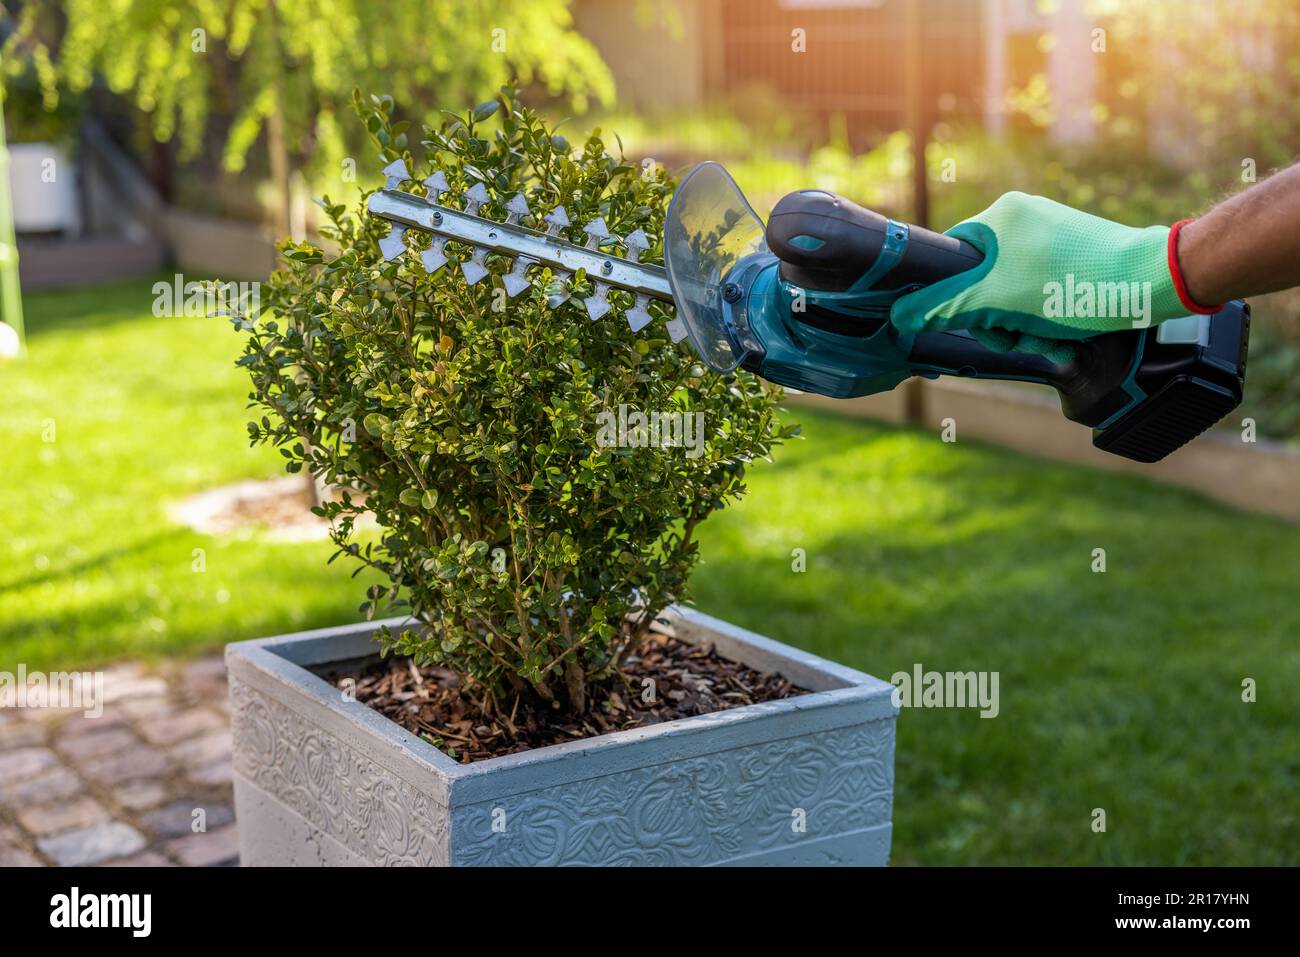 gardener is pruning and shaping potted boxwood shrub using cordless garden trimmer. topiary and plant care Stock Photo